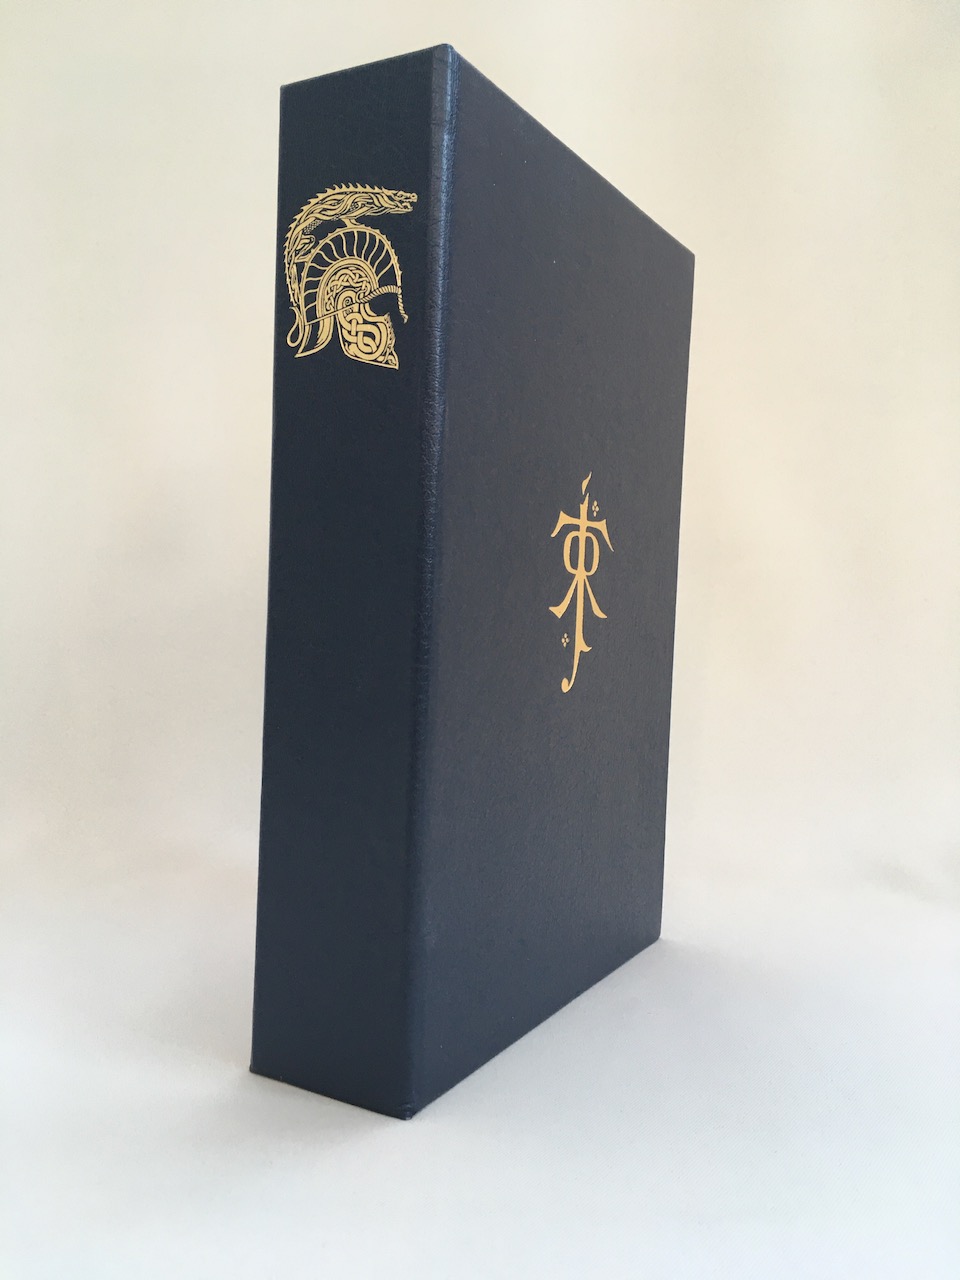 
The Children of Hurin Leather Signed Limited Edition - Super Deluxe Edition 2